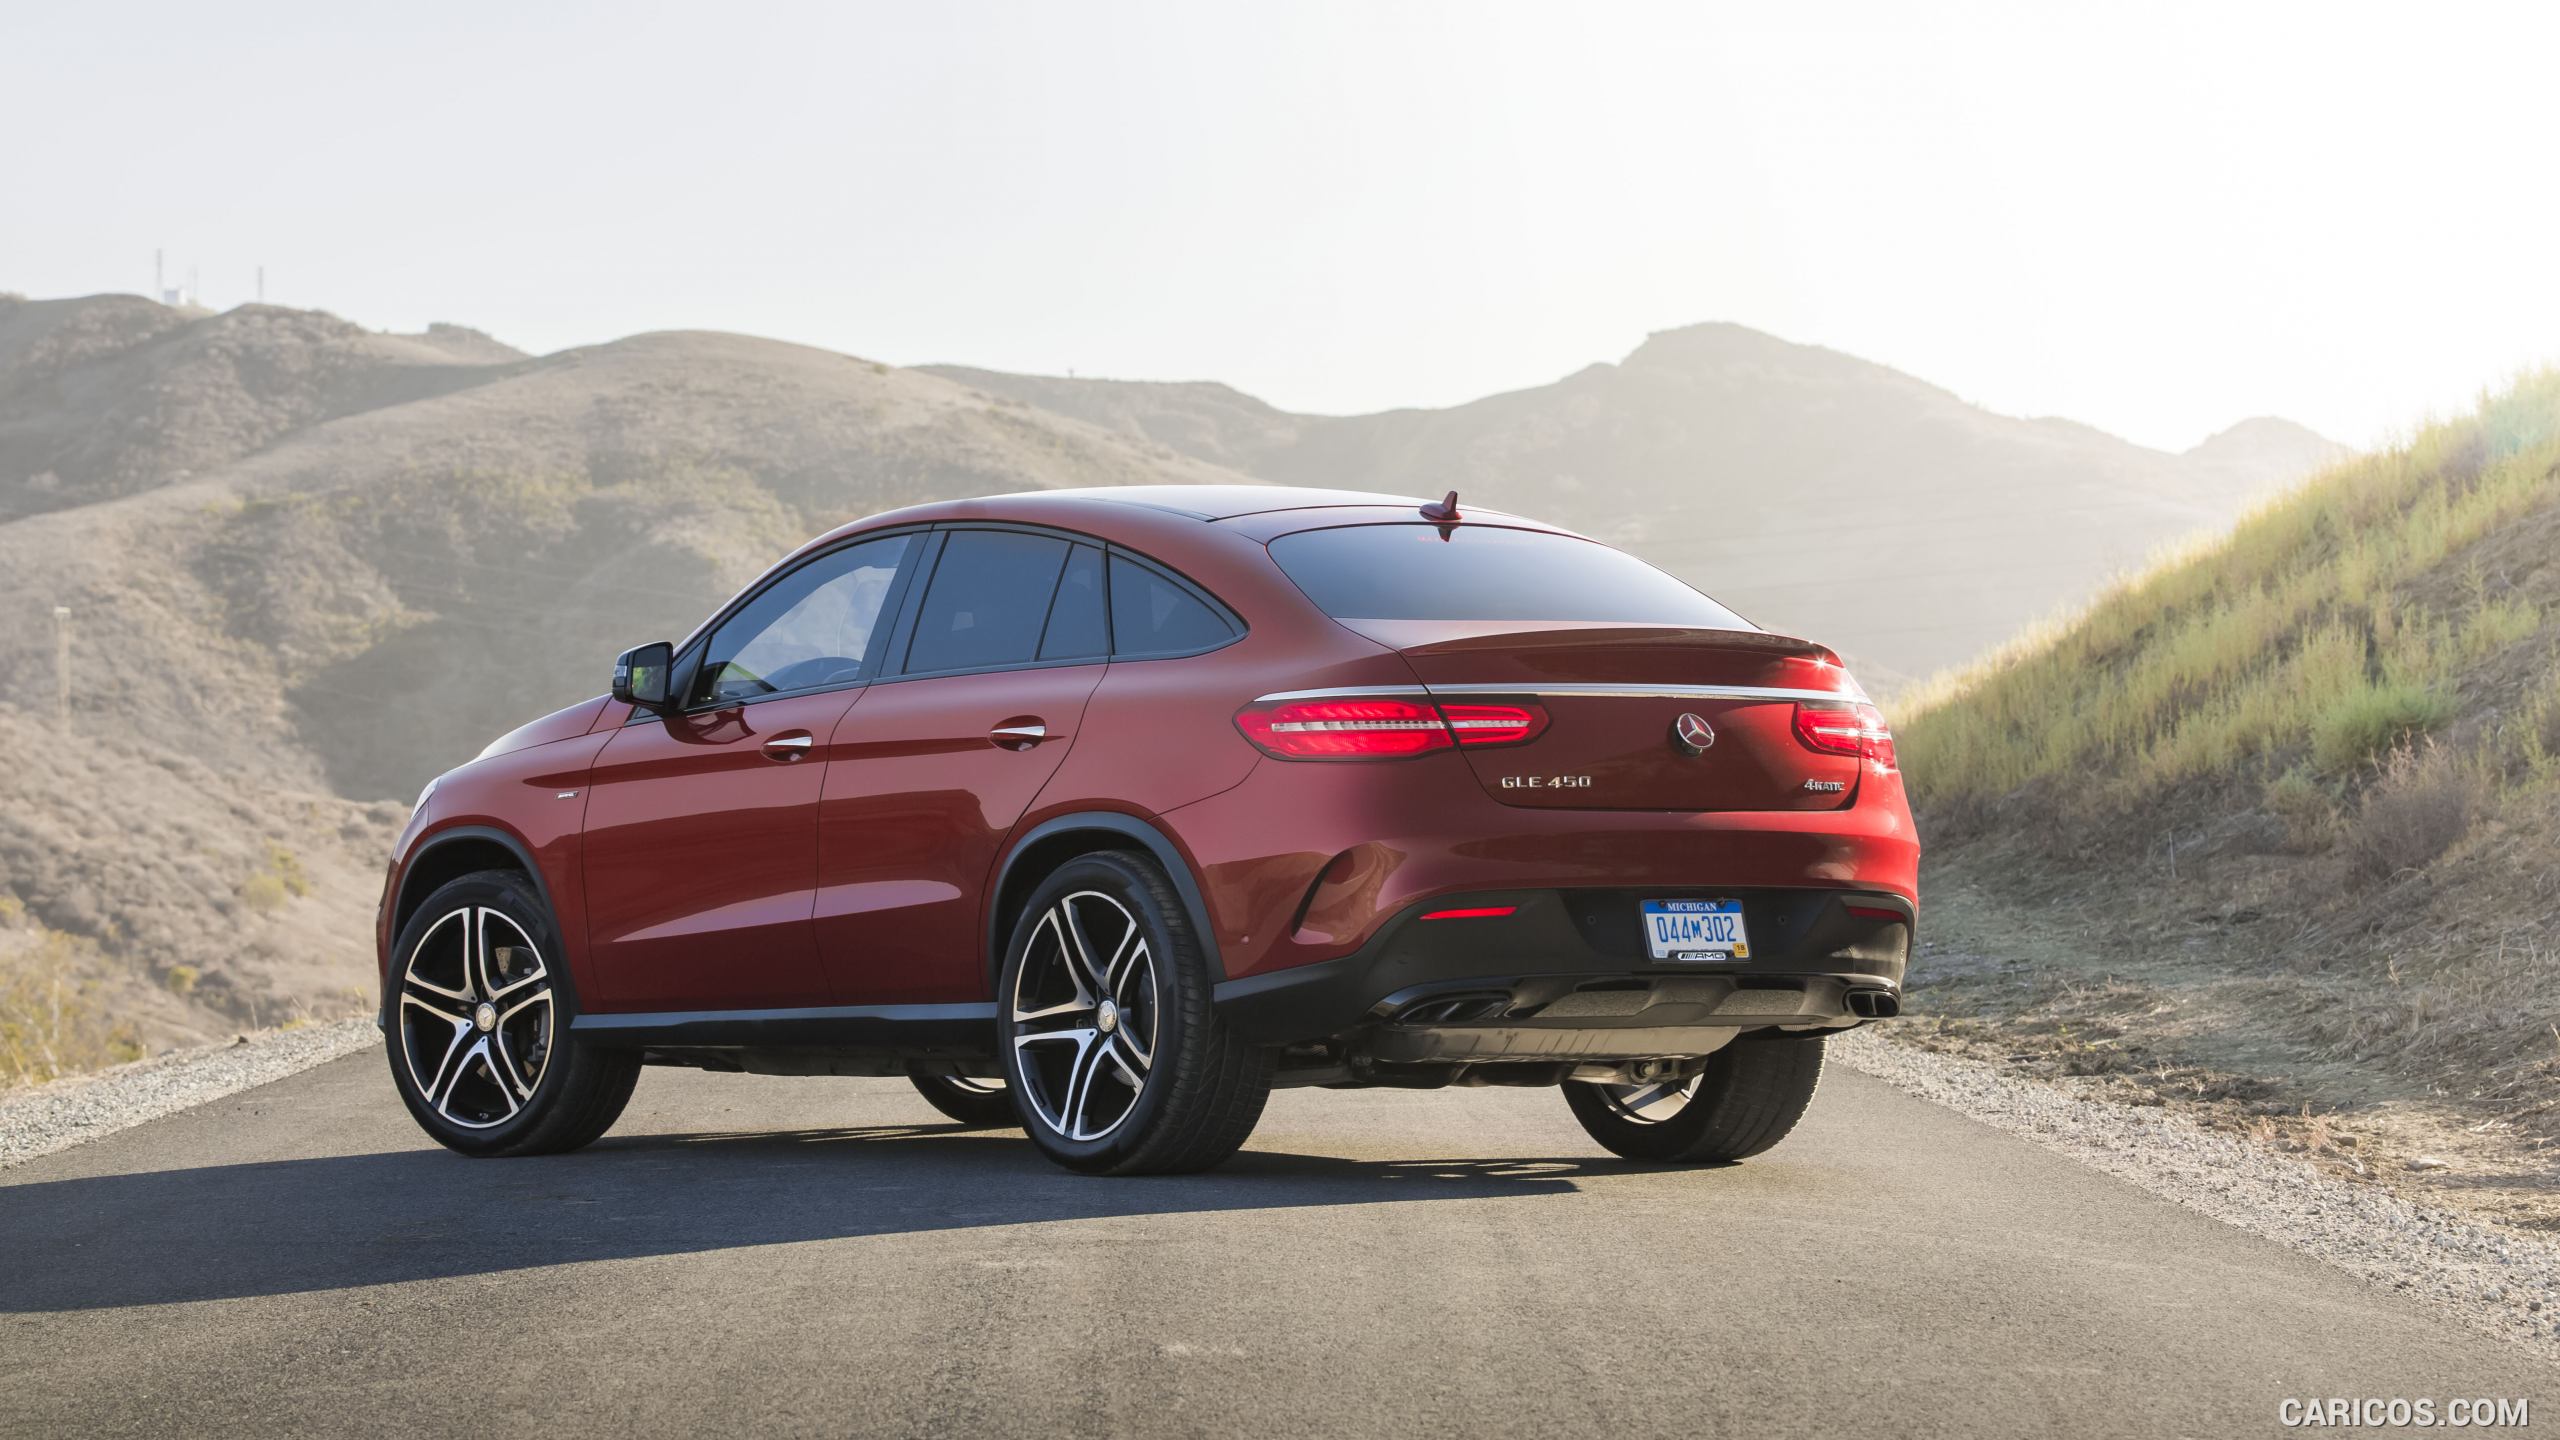 2016 Mercedes-Benz GLE 450 AMG Coupe 4MATIC (US-Spec) - Rear, #37 of 115